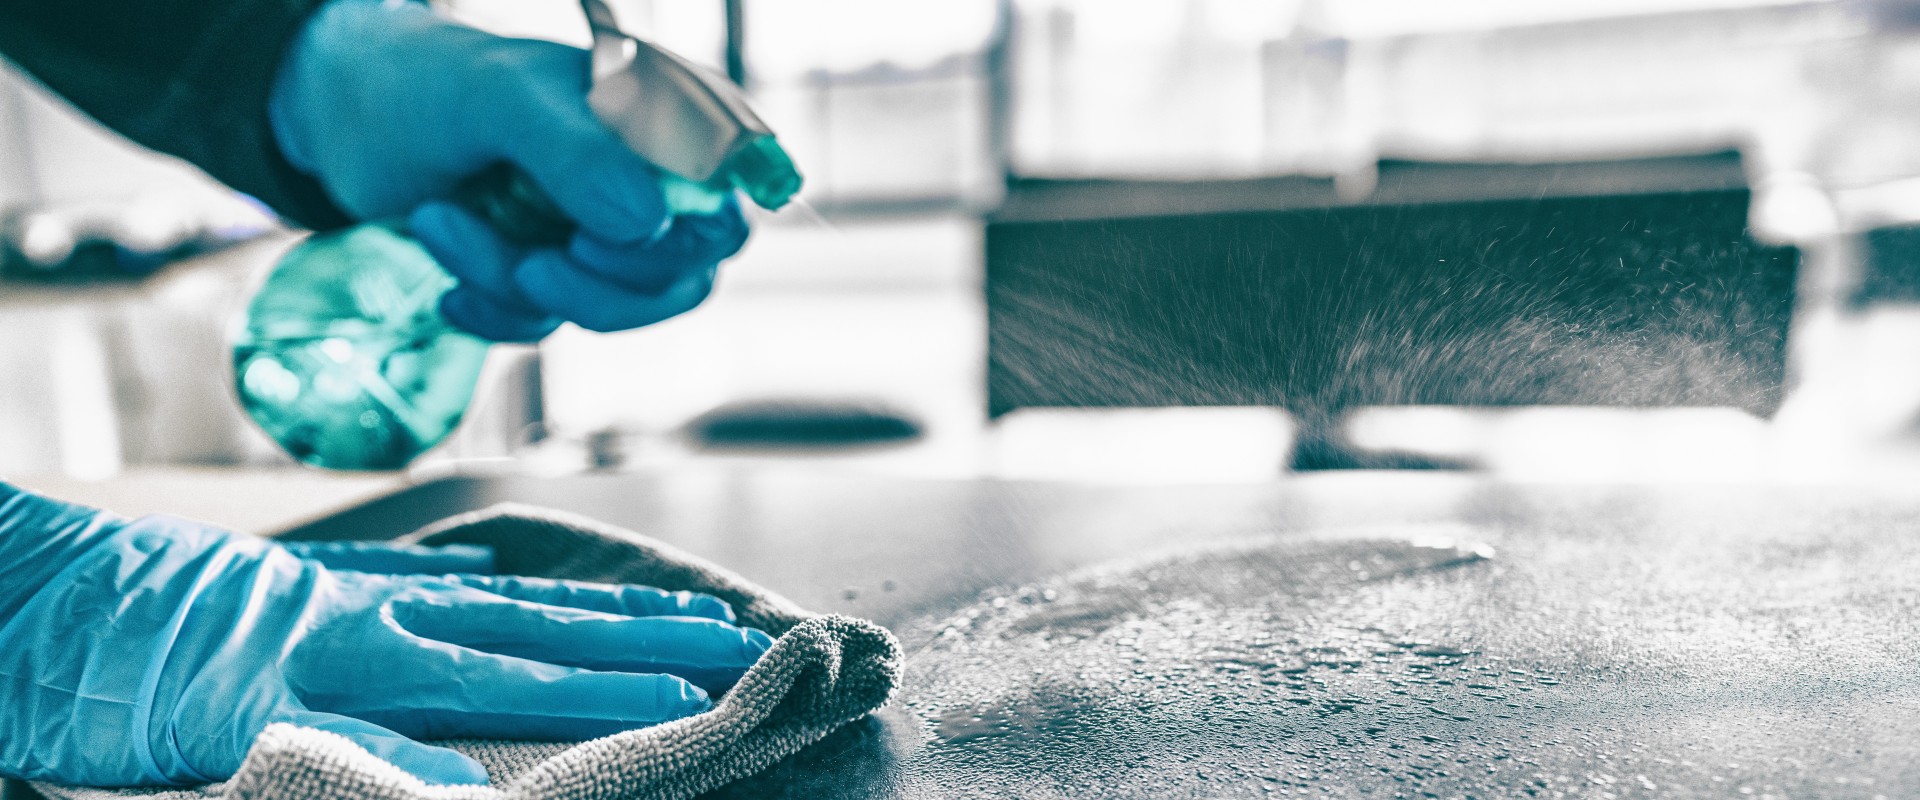 Cleaning, Disinfection, Sterilization. What is the Difference?